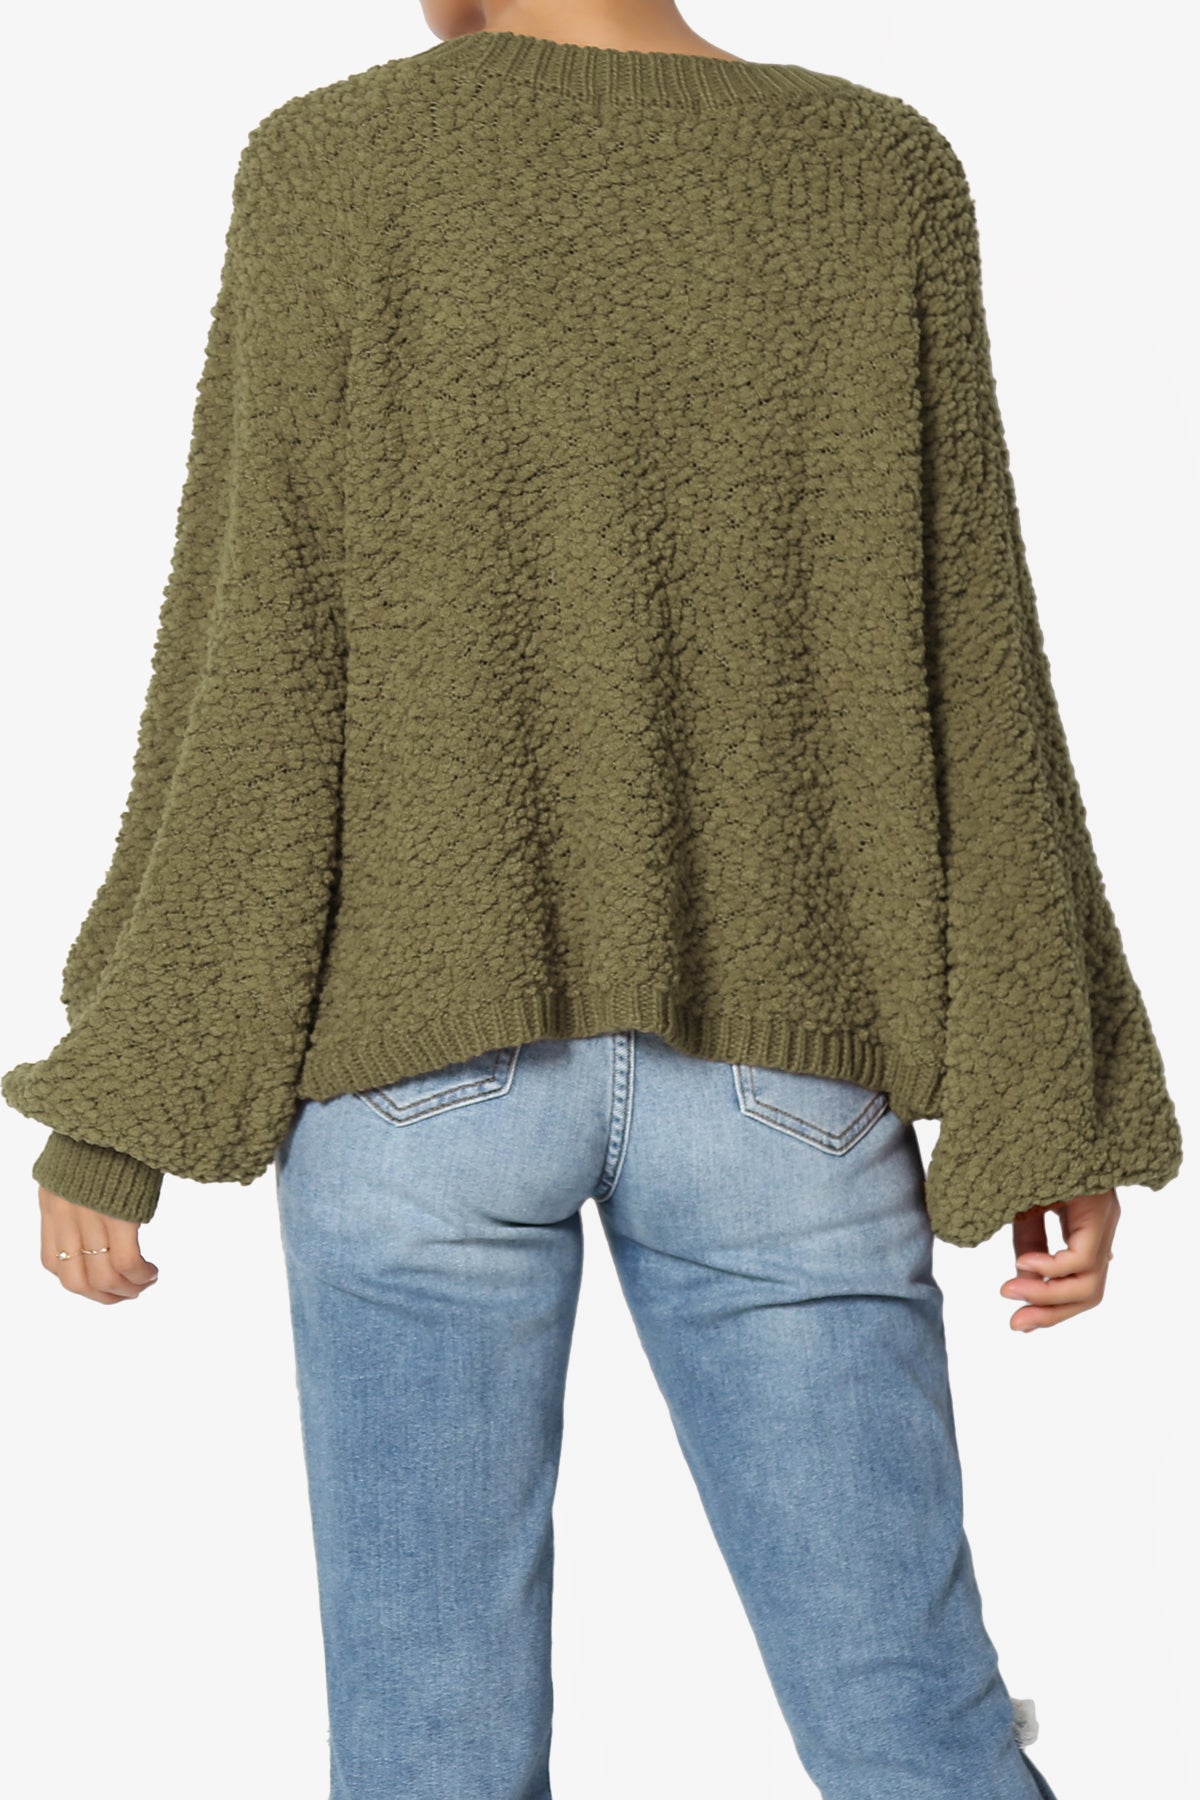 Load image into Gallery viewer, Barry Fuzzy Knit Button Boxy Crop Cardigan OLIVE KHAKI_2
